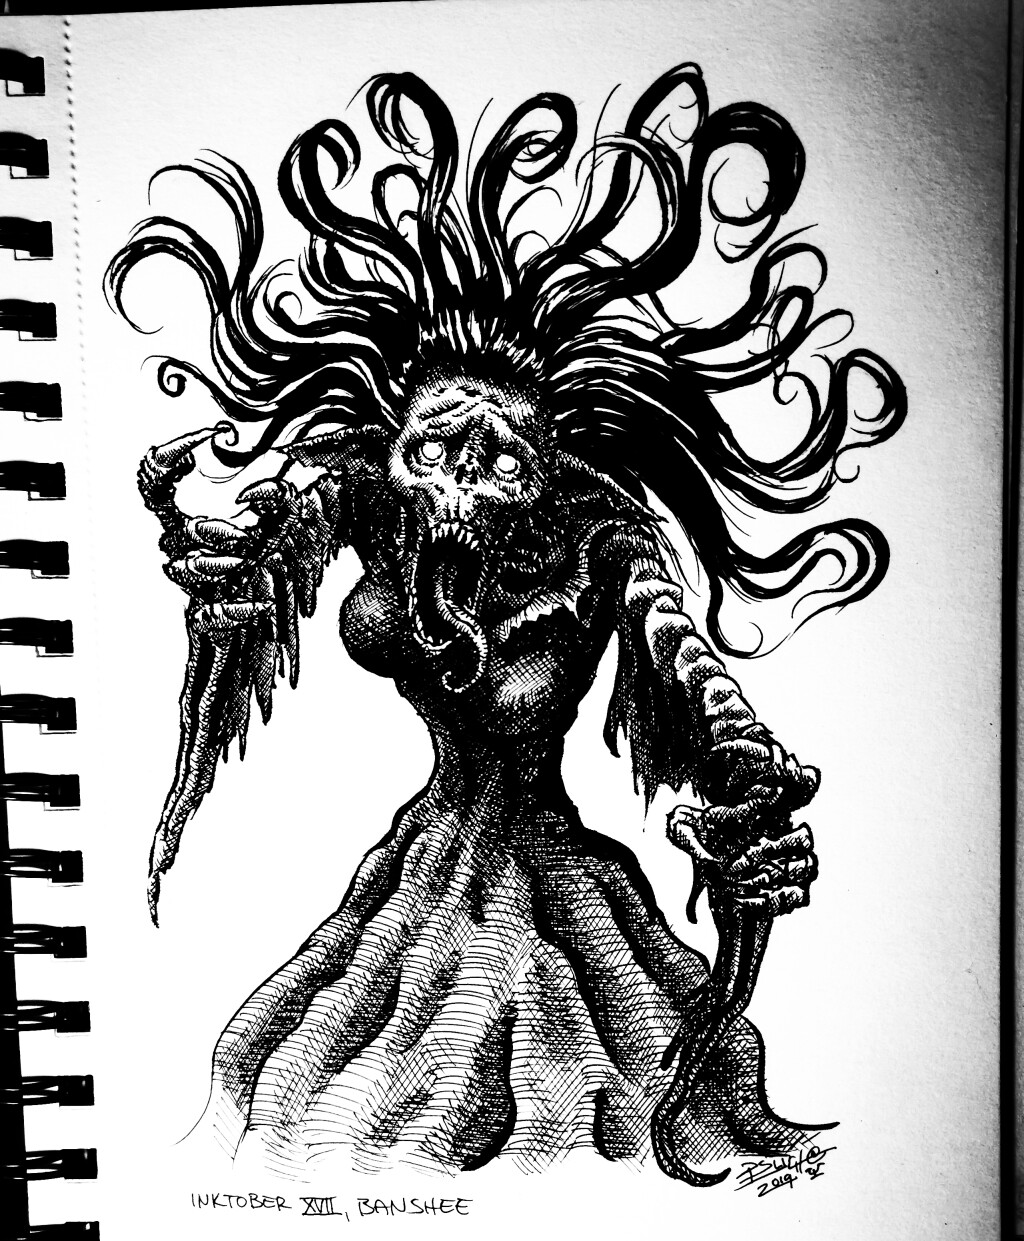 Banshee - It is a death spirit from Celtic folklore. It usually represents a dead maiden. Whoever hears its screams at night is surely to die soon.